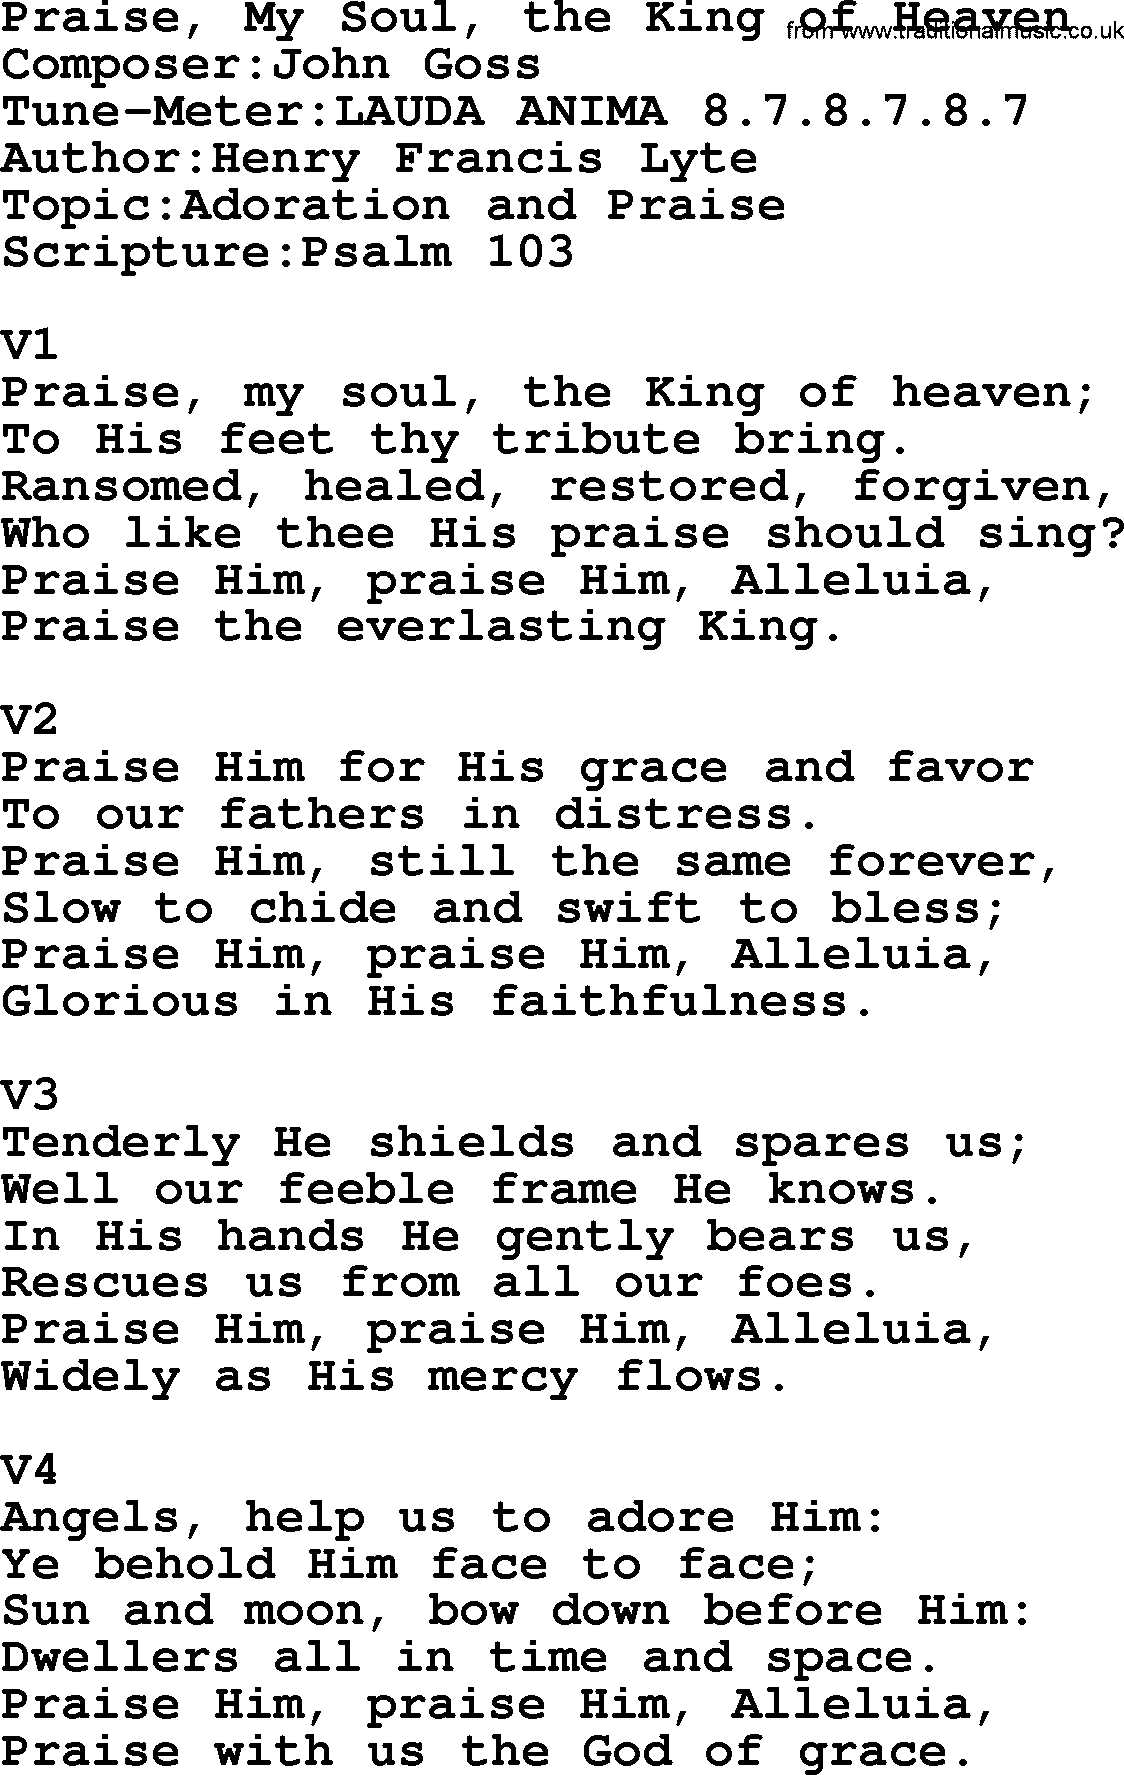 Adventist Hynms collection, Hymn: Praise, My Soul, The King Of Heaven, lyrics with PDF